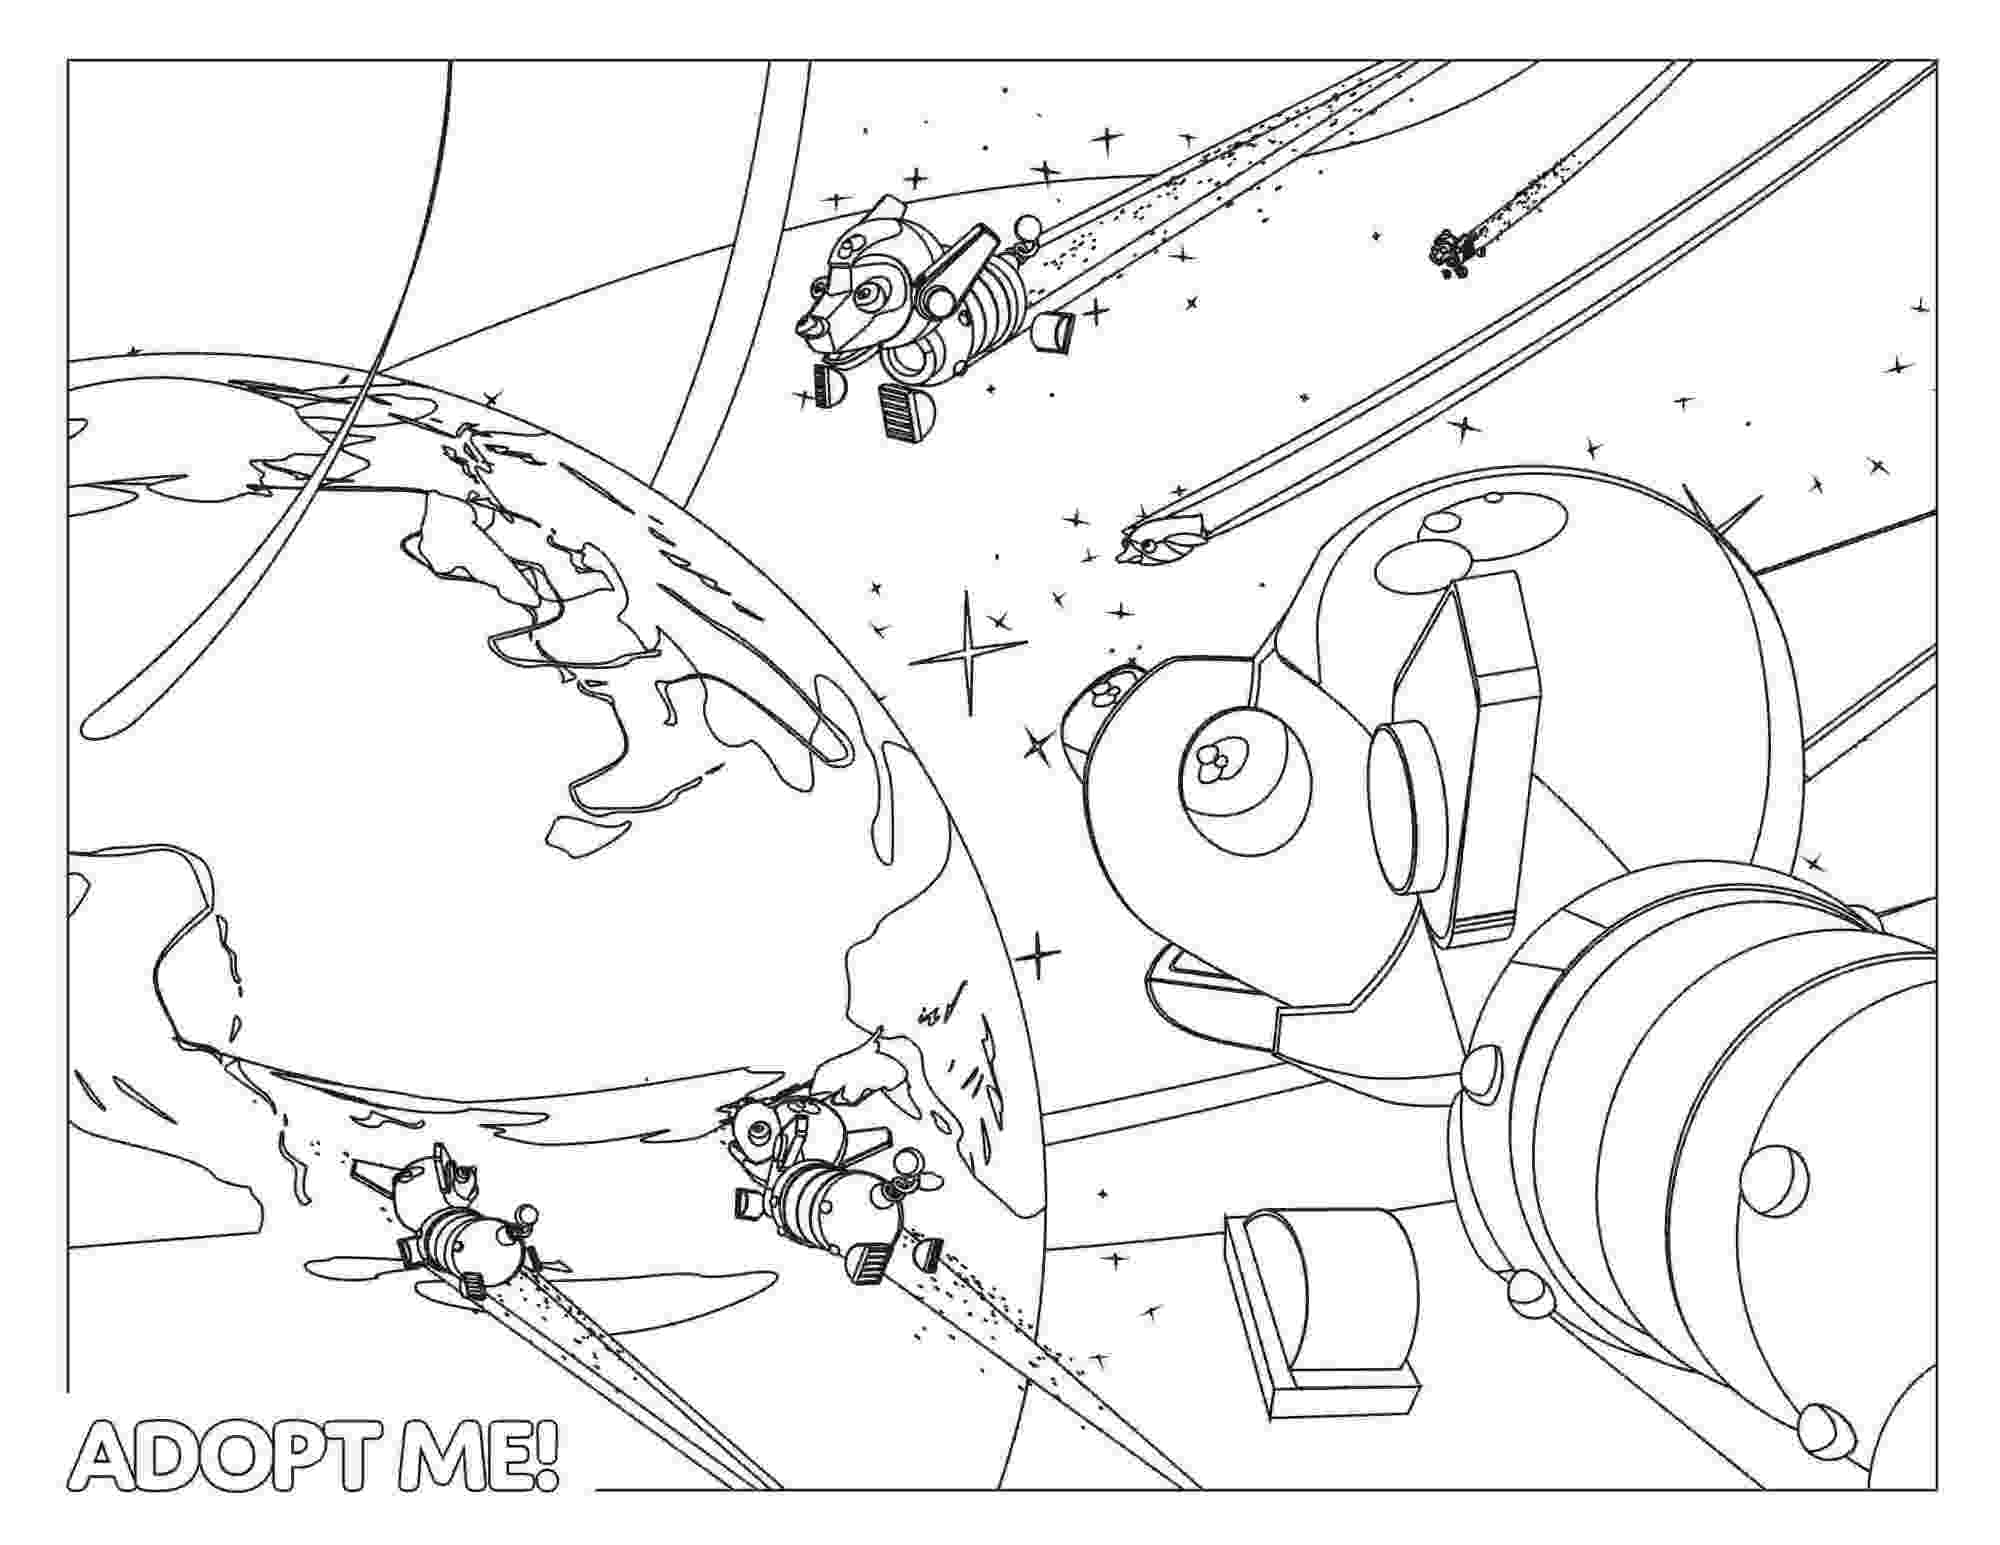 Adopt me Robo Dog became an astronaut in space Coloring Pages   Adopt ...